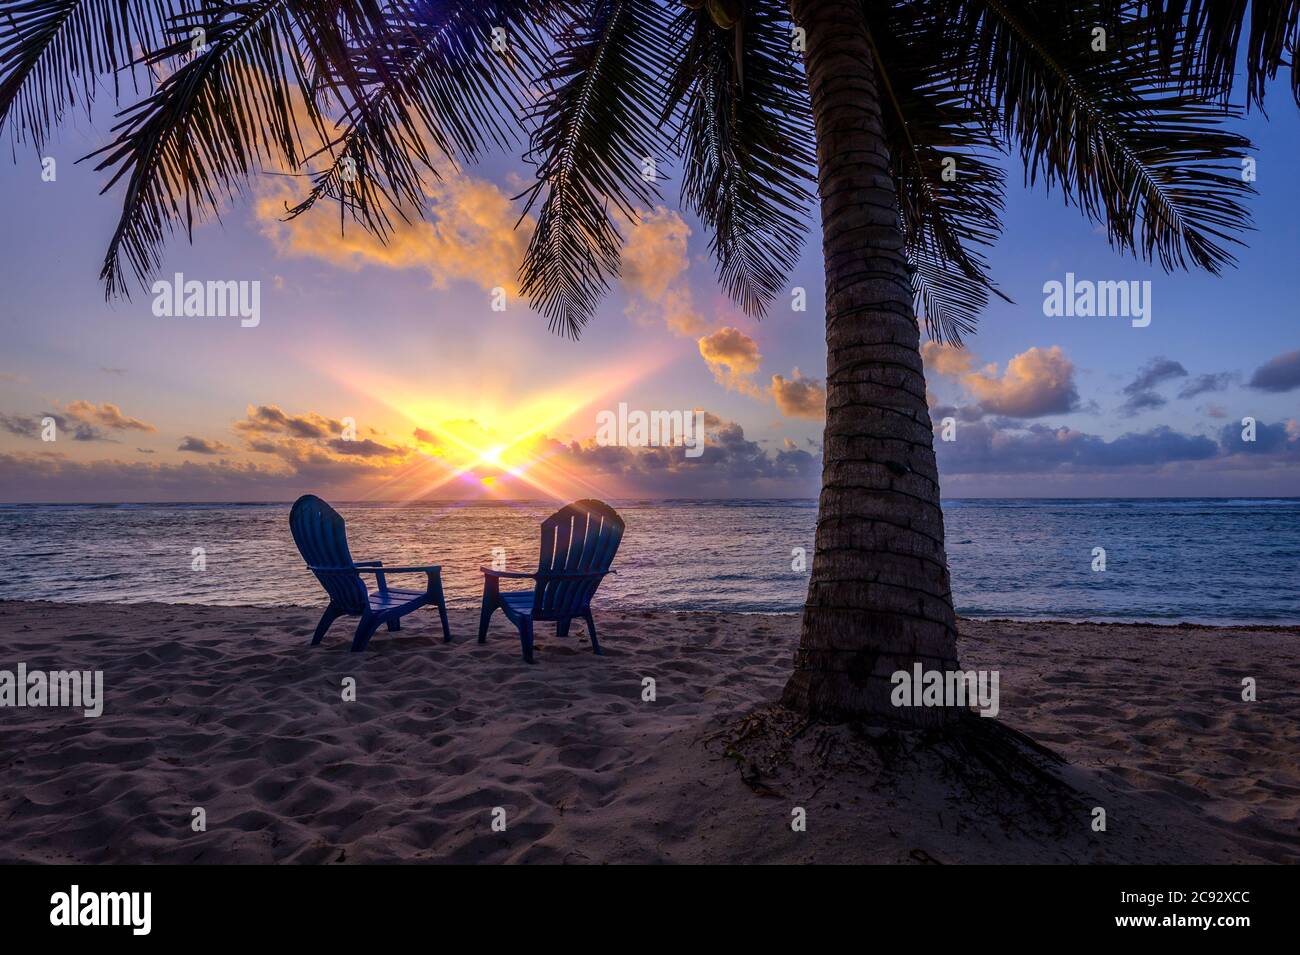 Sunset with sun flare, beach chairs and palm tree. Grand Cayman Island Stock Photo